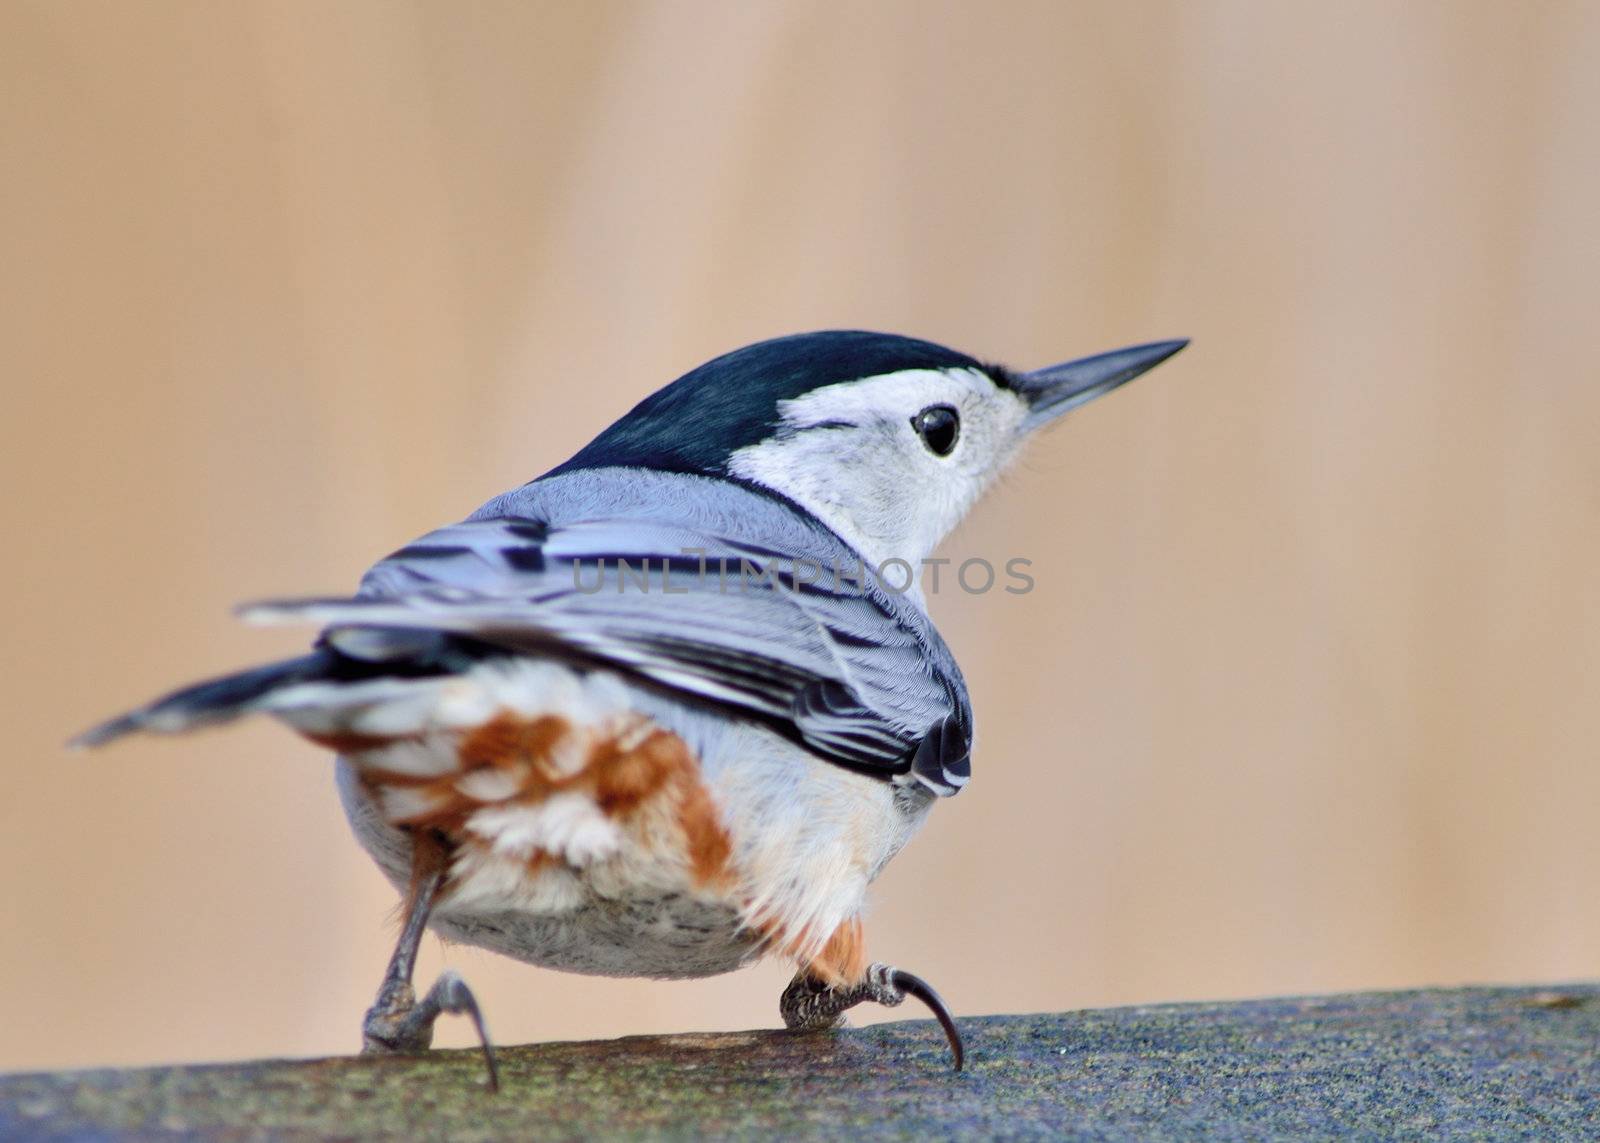 Nuthatch perched on a railing looking right.